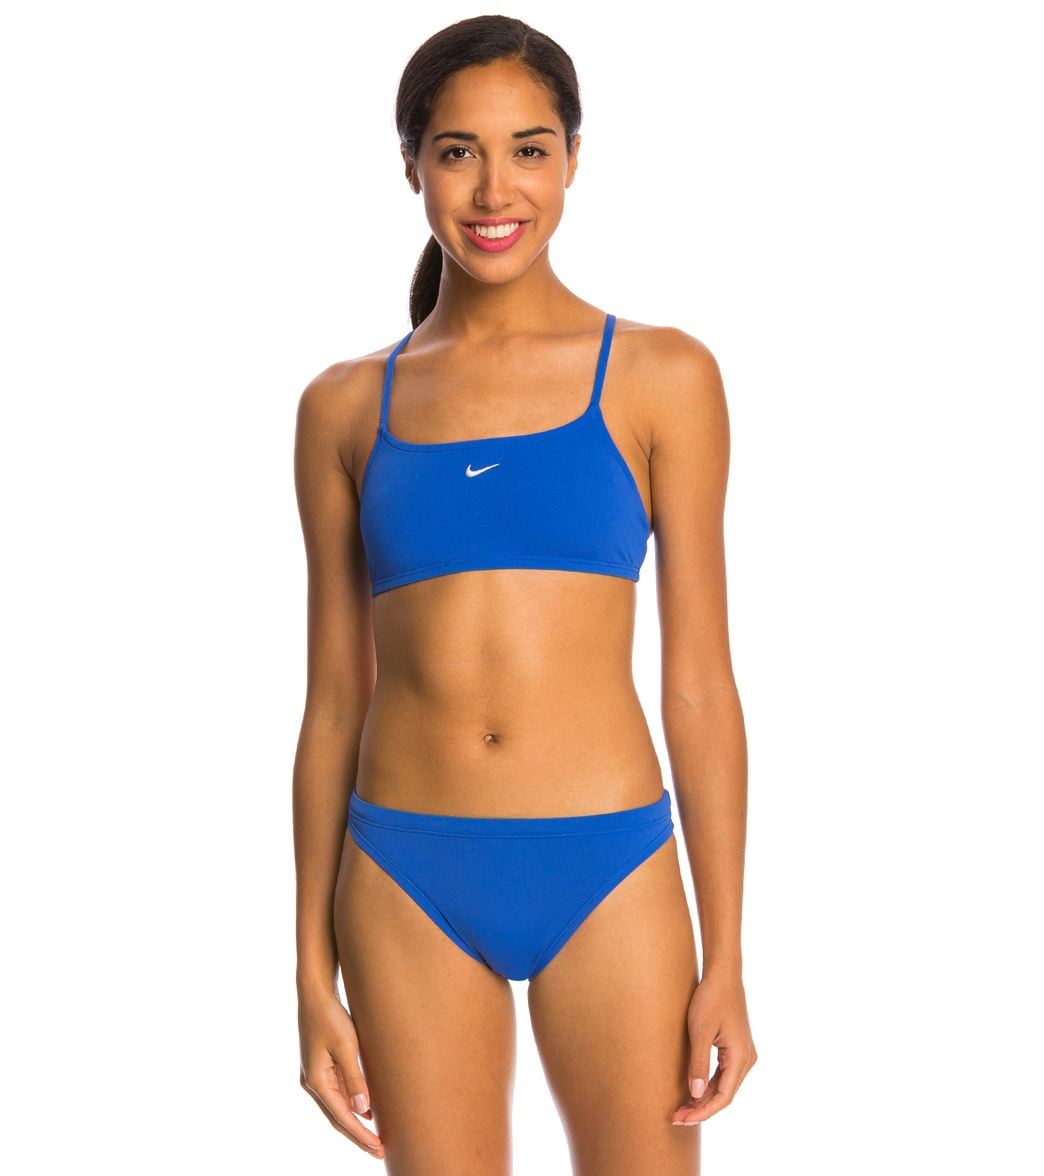 Nike Swim Poly Core Solids Sport Two Piece Swimsuit Set at SwimOutlet.com - Free Shipping